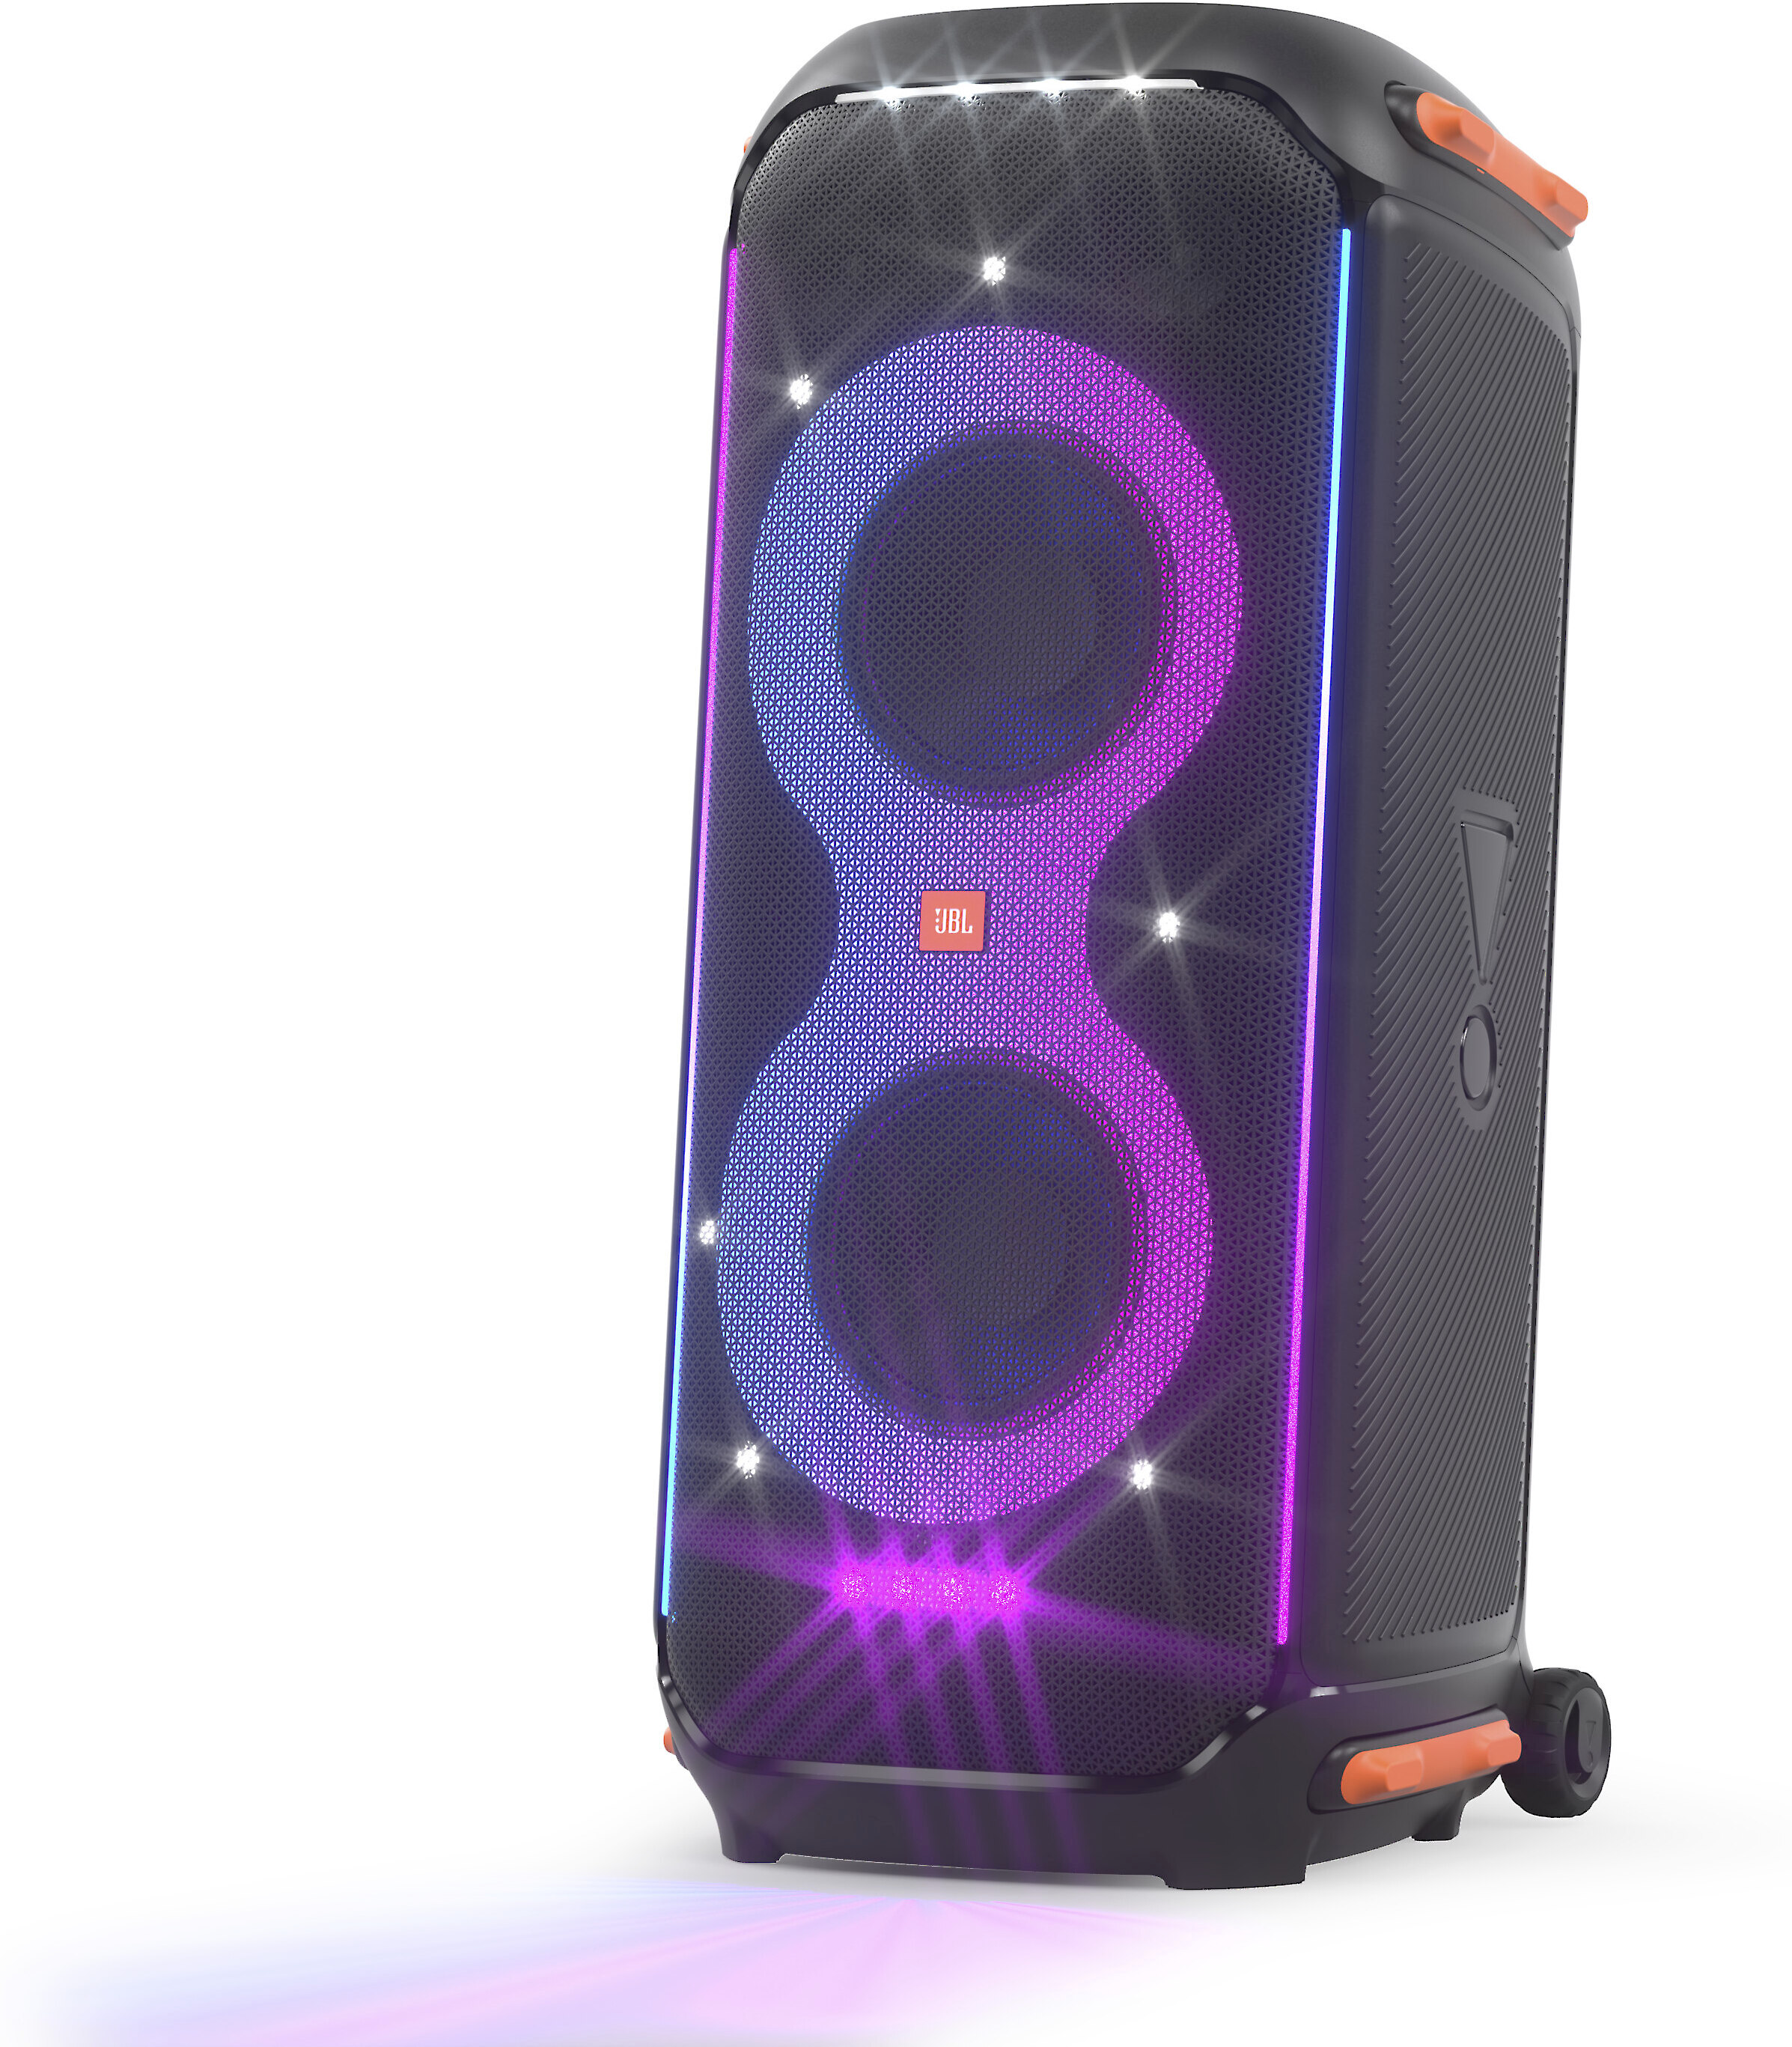 New JBL PartyBox 710 Design Review - Design Reviews